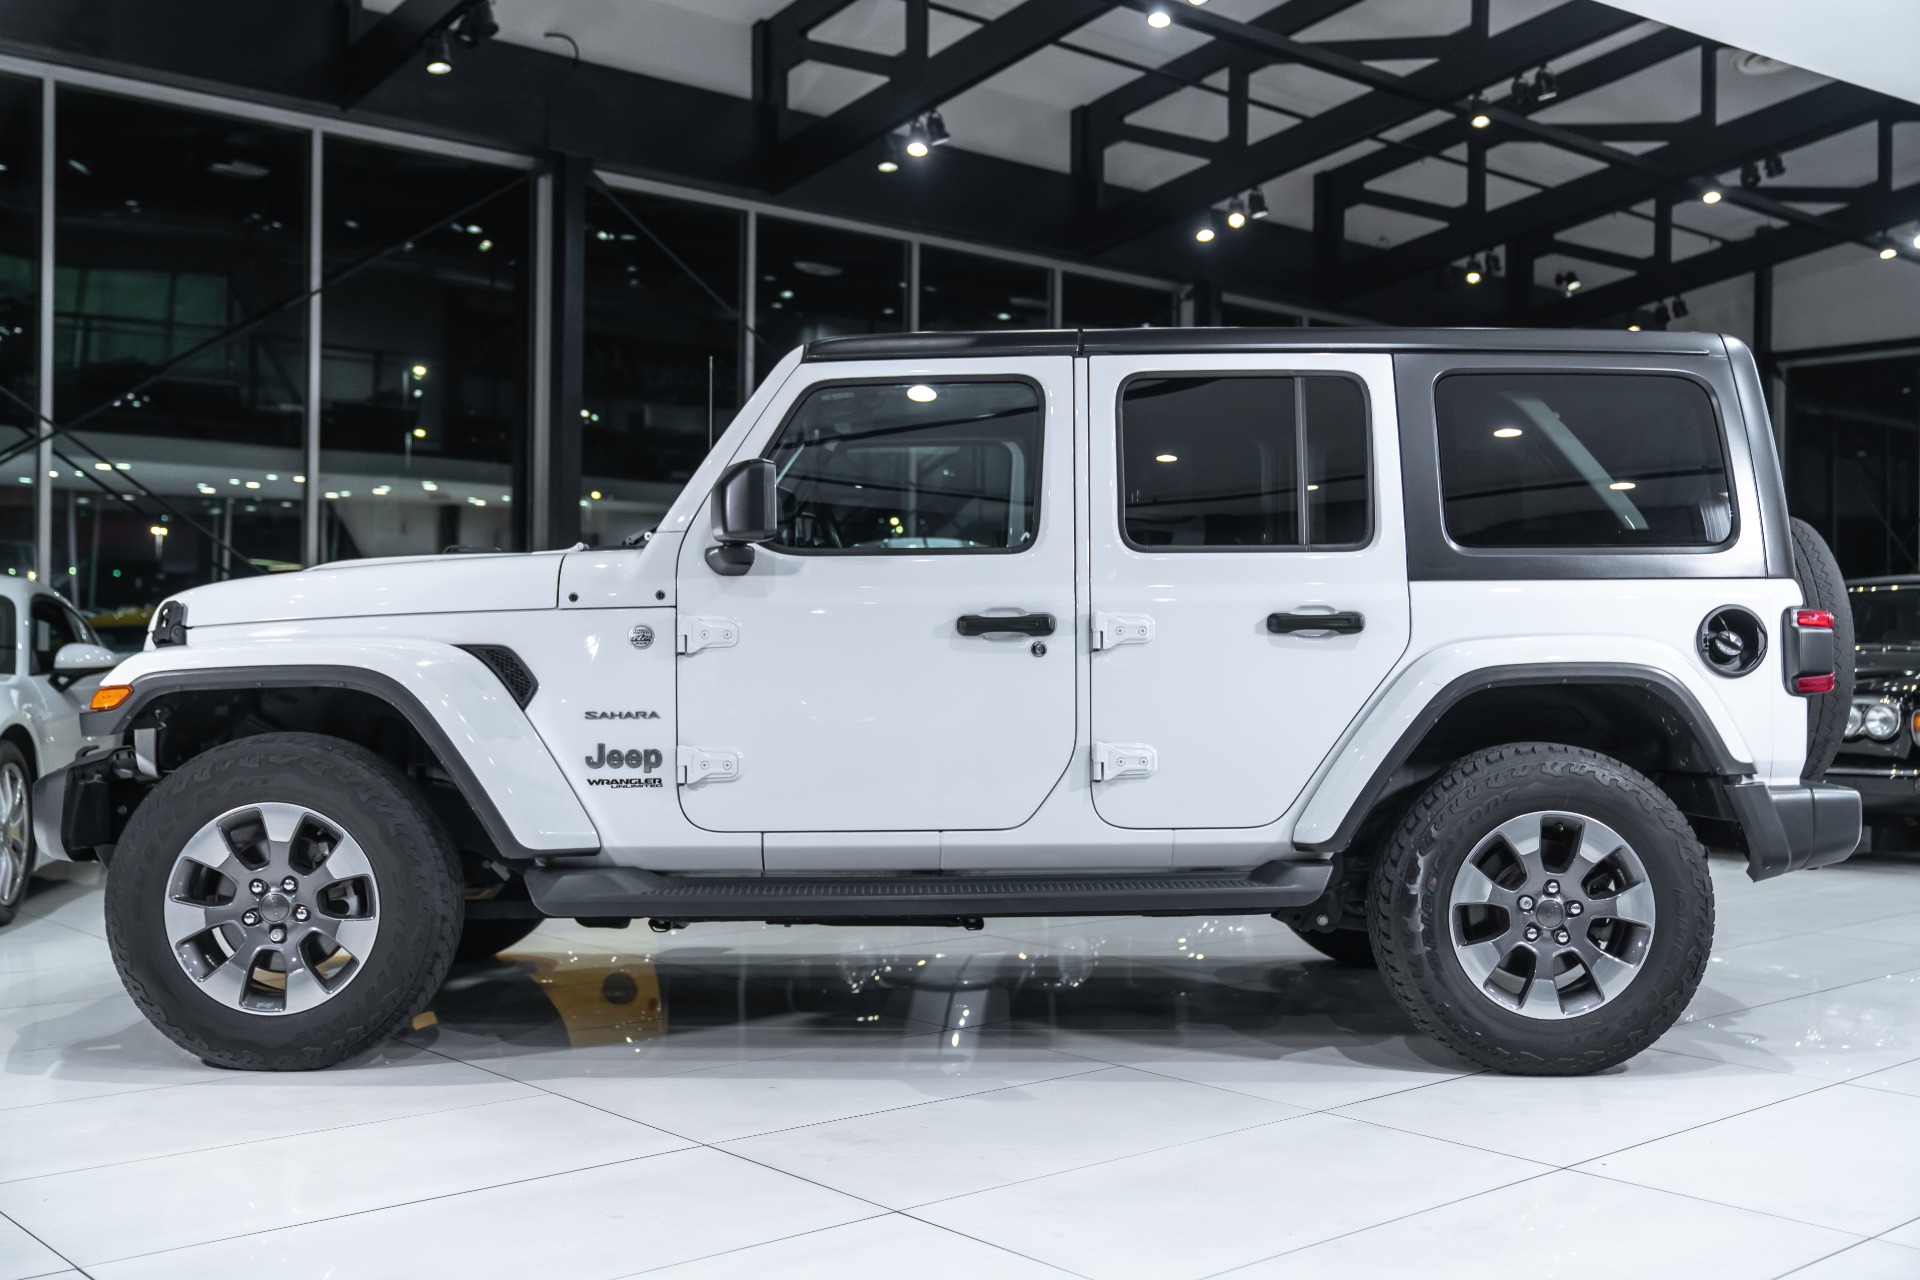 Used-2018-Jeep-Wrangler-Unlimited-Sahara-4X4-Leather-Trim-3-Piece-Hard-Top-Cold-Weather-Group-Upgraded-Sound